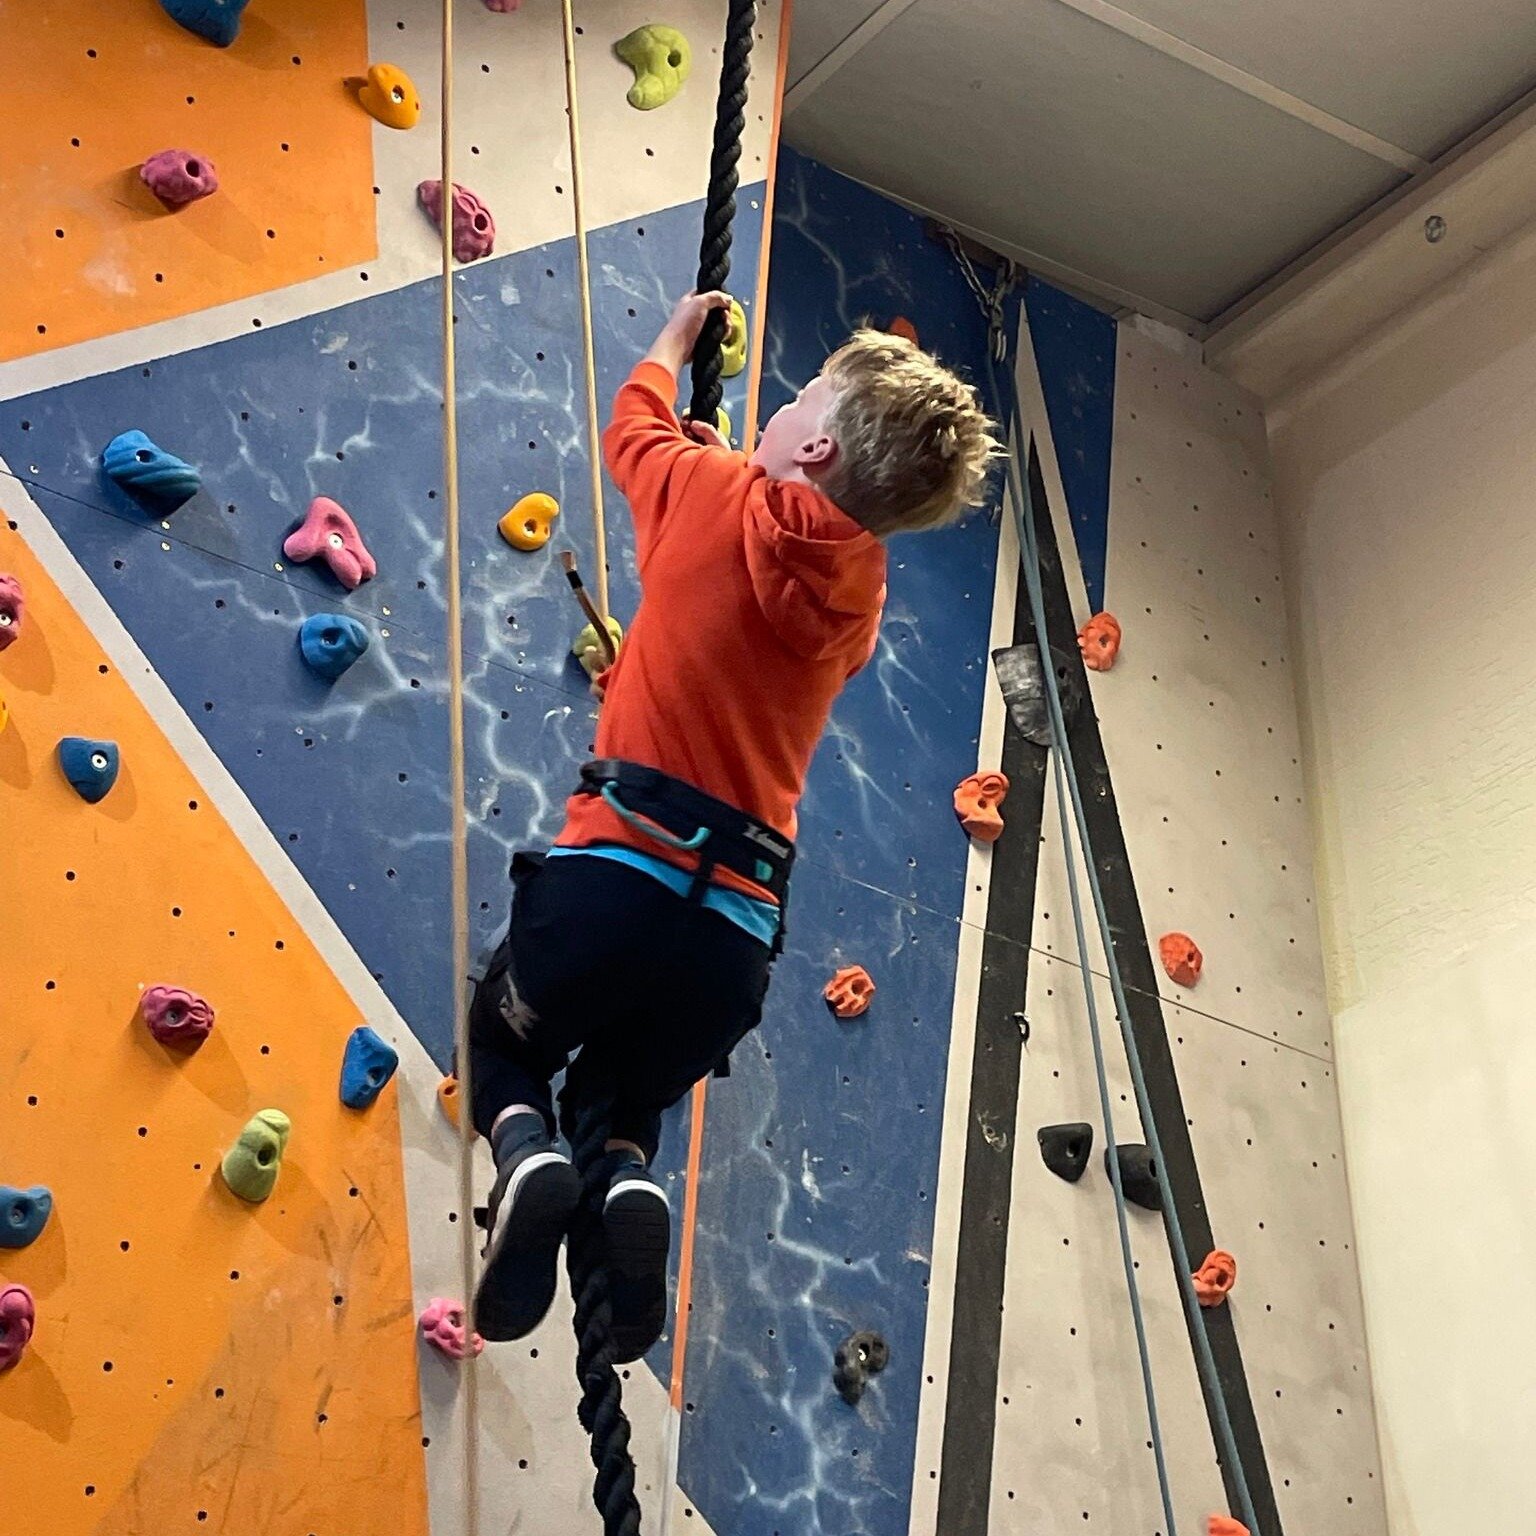 New holds and volumes expected to arrive soon. We're looking forward to putting up some challenging new routes for you all 😀🧗 #nofear #climbing #indoorplay